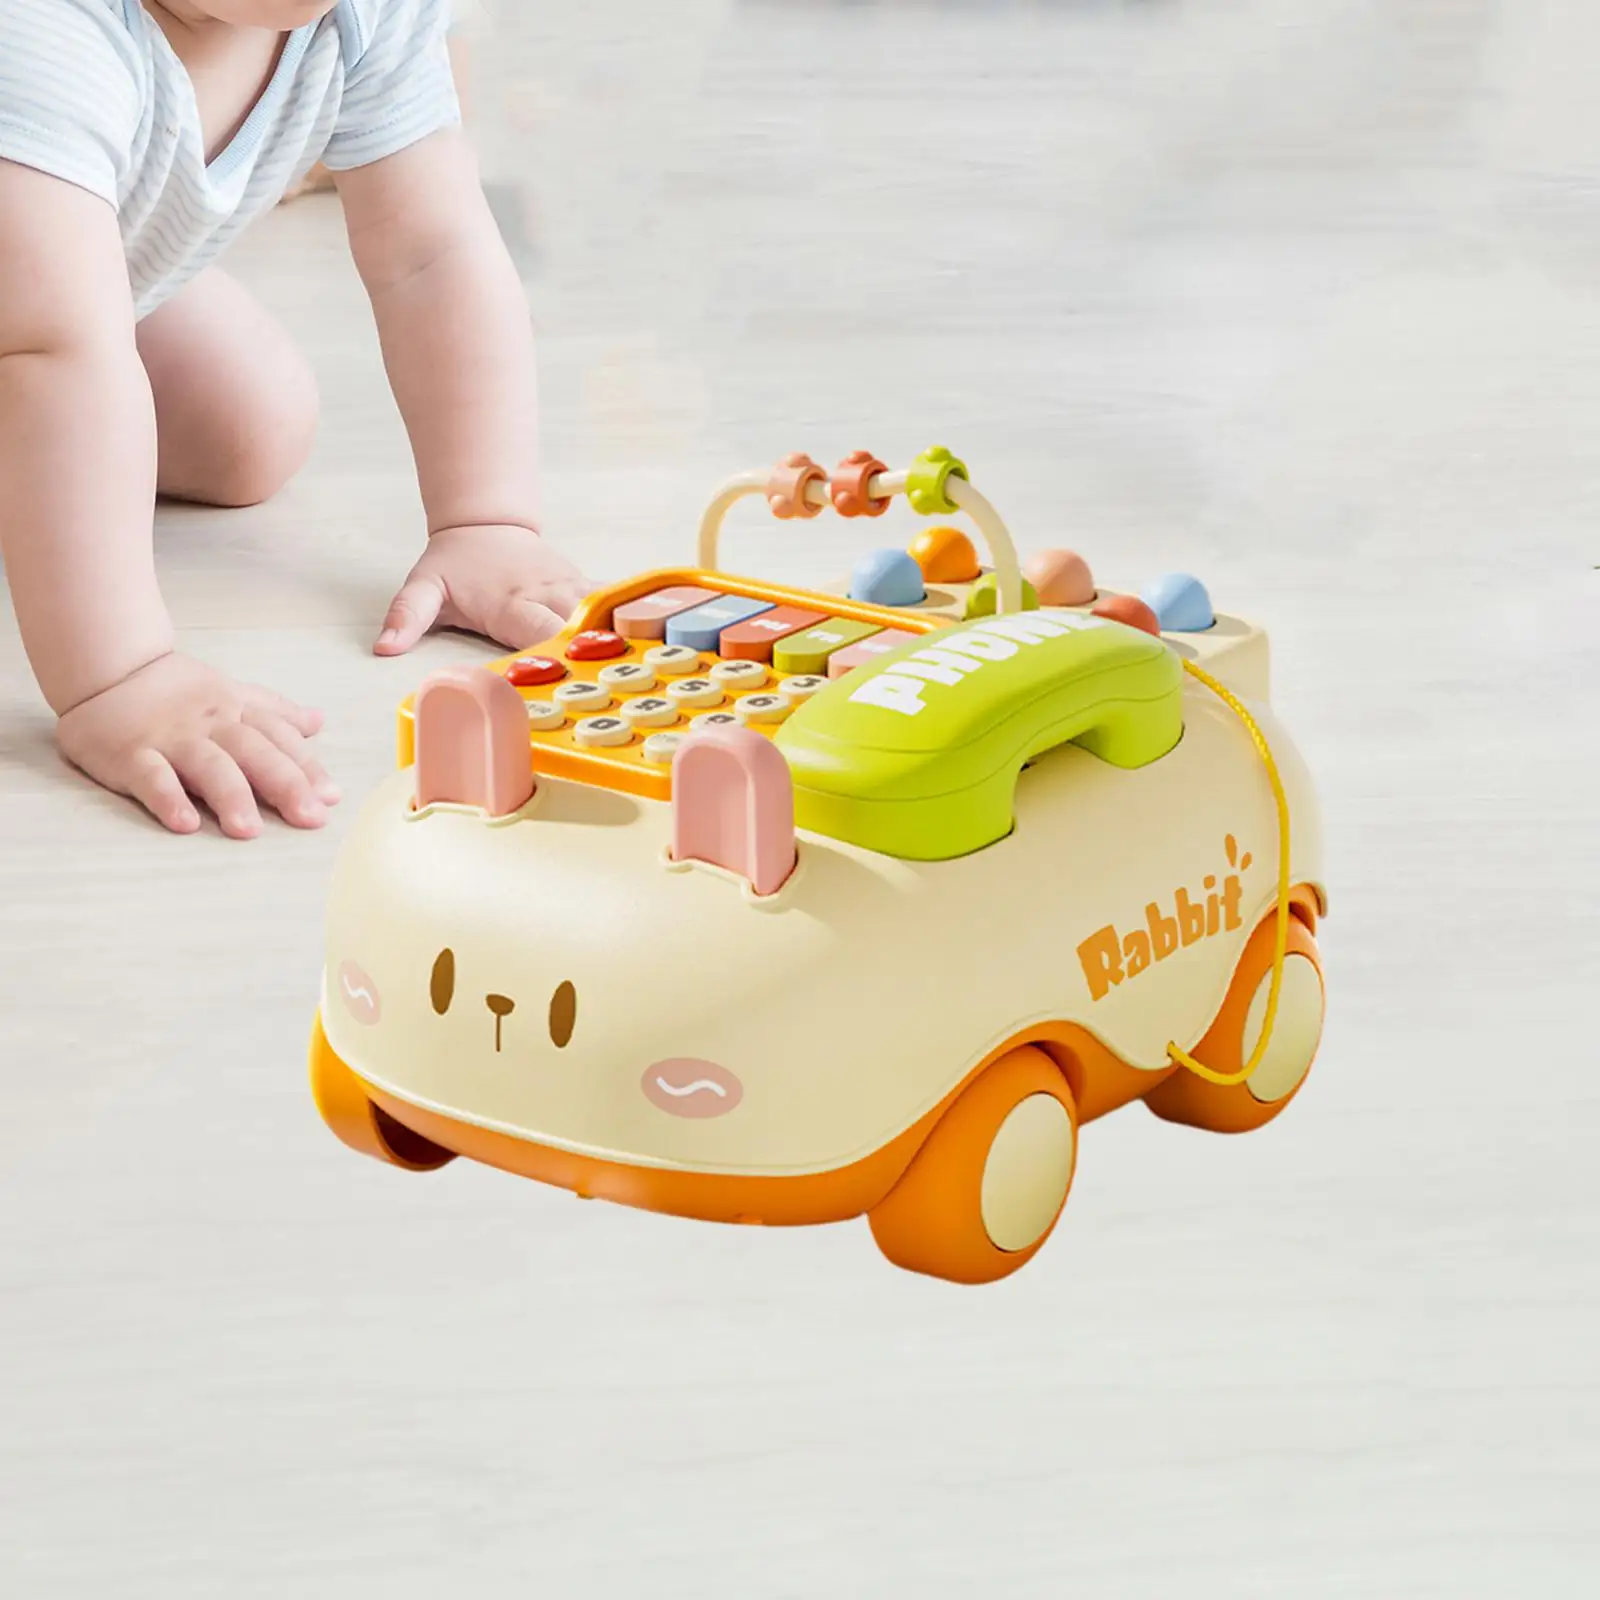 Baby Telephone Toy with Music and Lights Educational Toy Game Parent Child Interactive Toy for Boys Kids Baby Interactive Toy